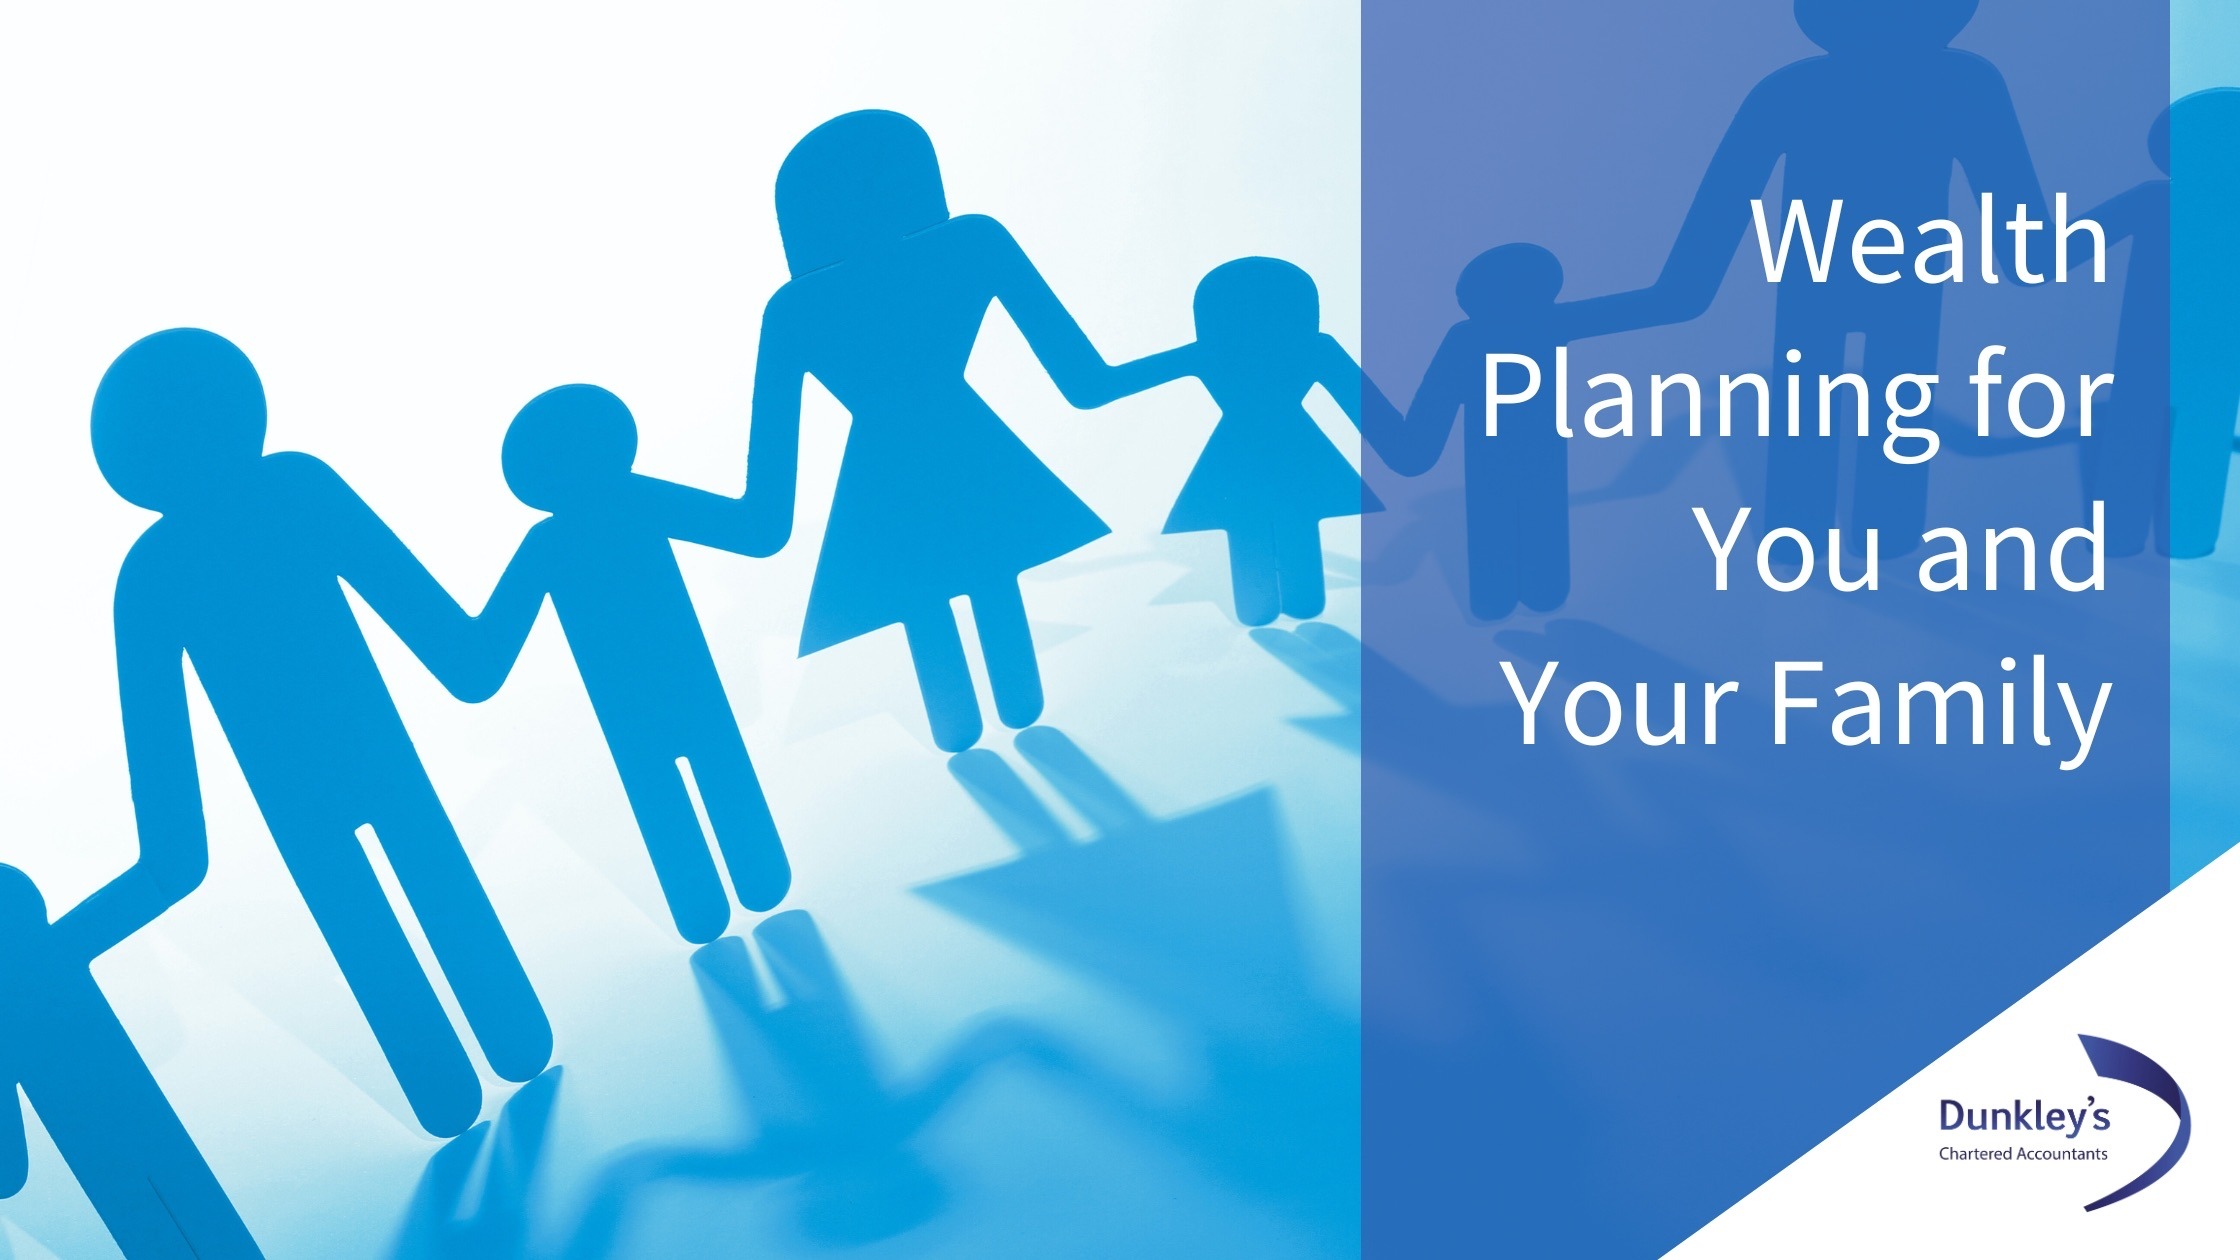 Weath Planning for You and Your Family